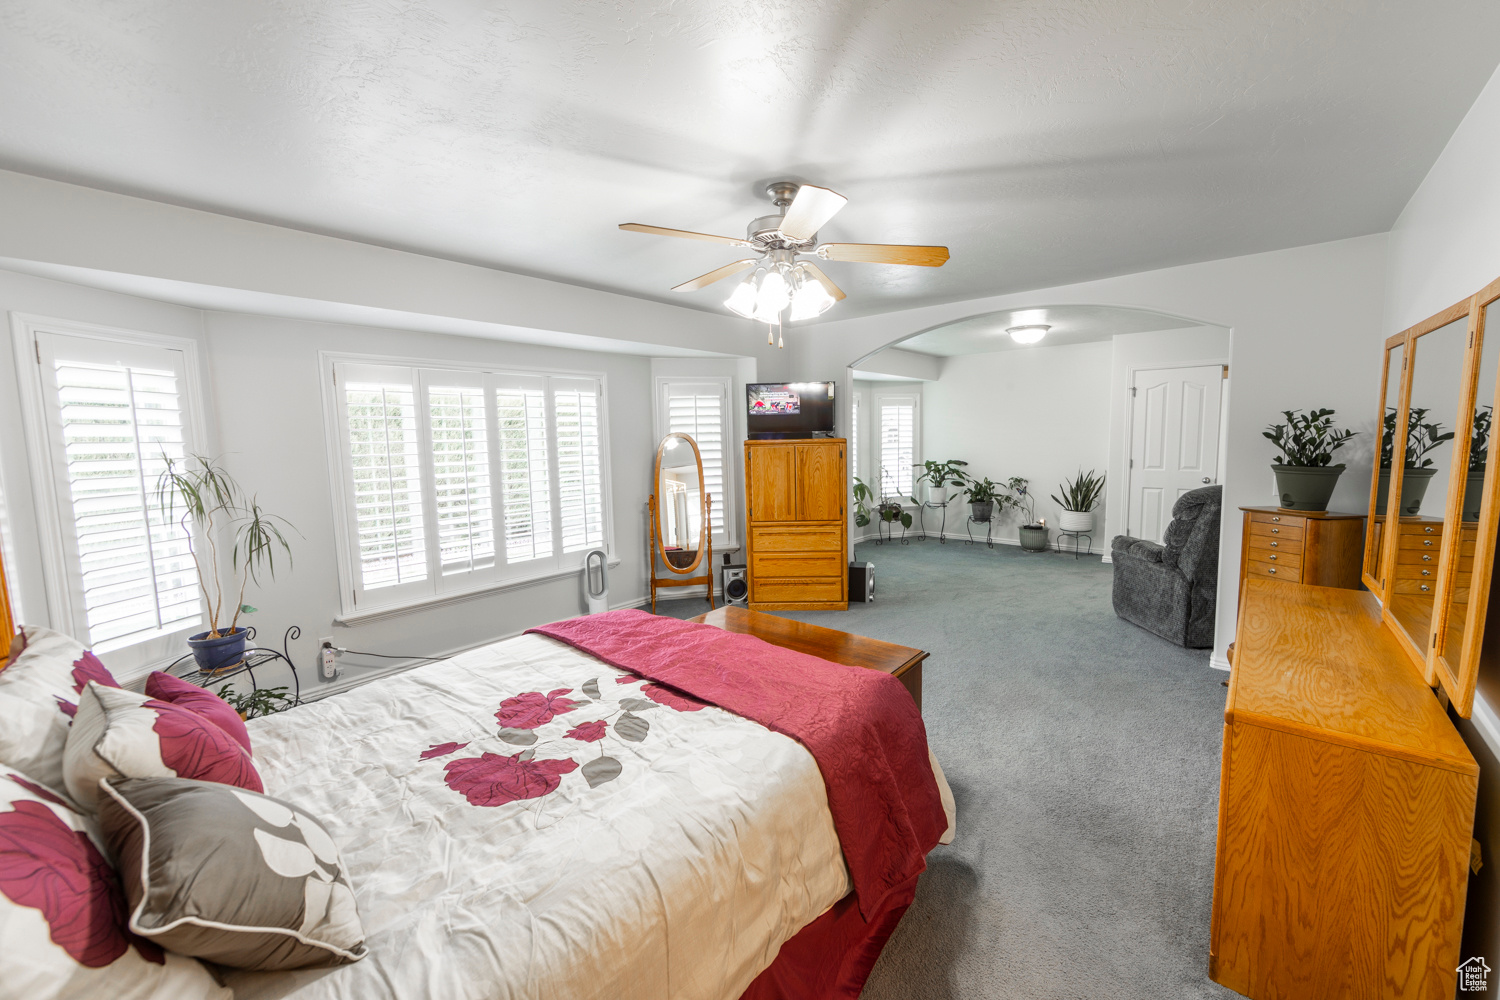 Spacious Master Bedroom with many windows for natural lighting, ceiling fan and carpet